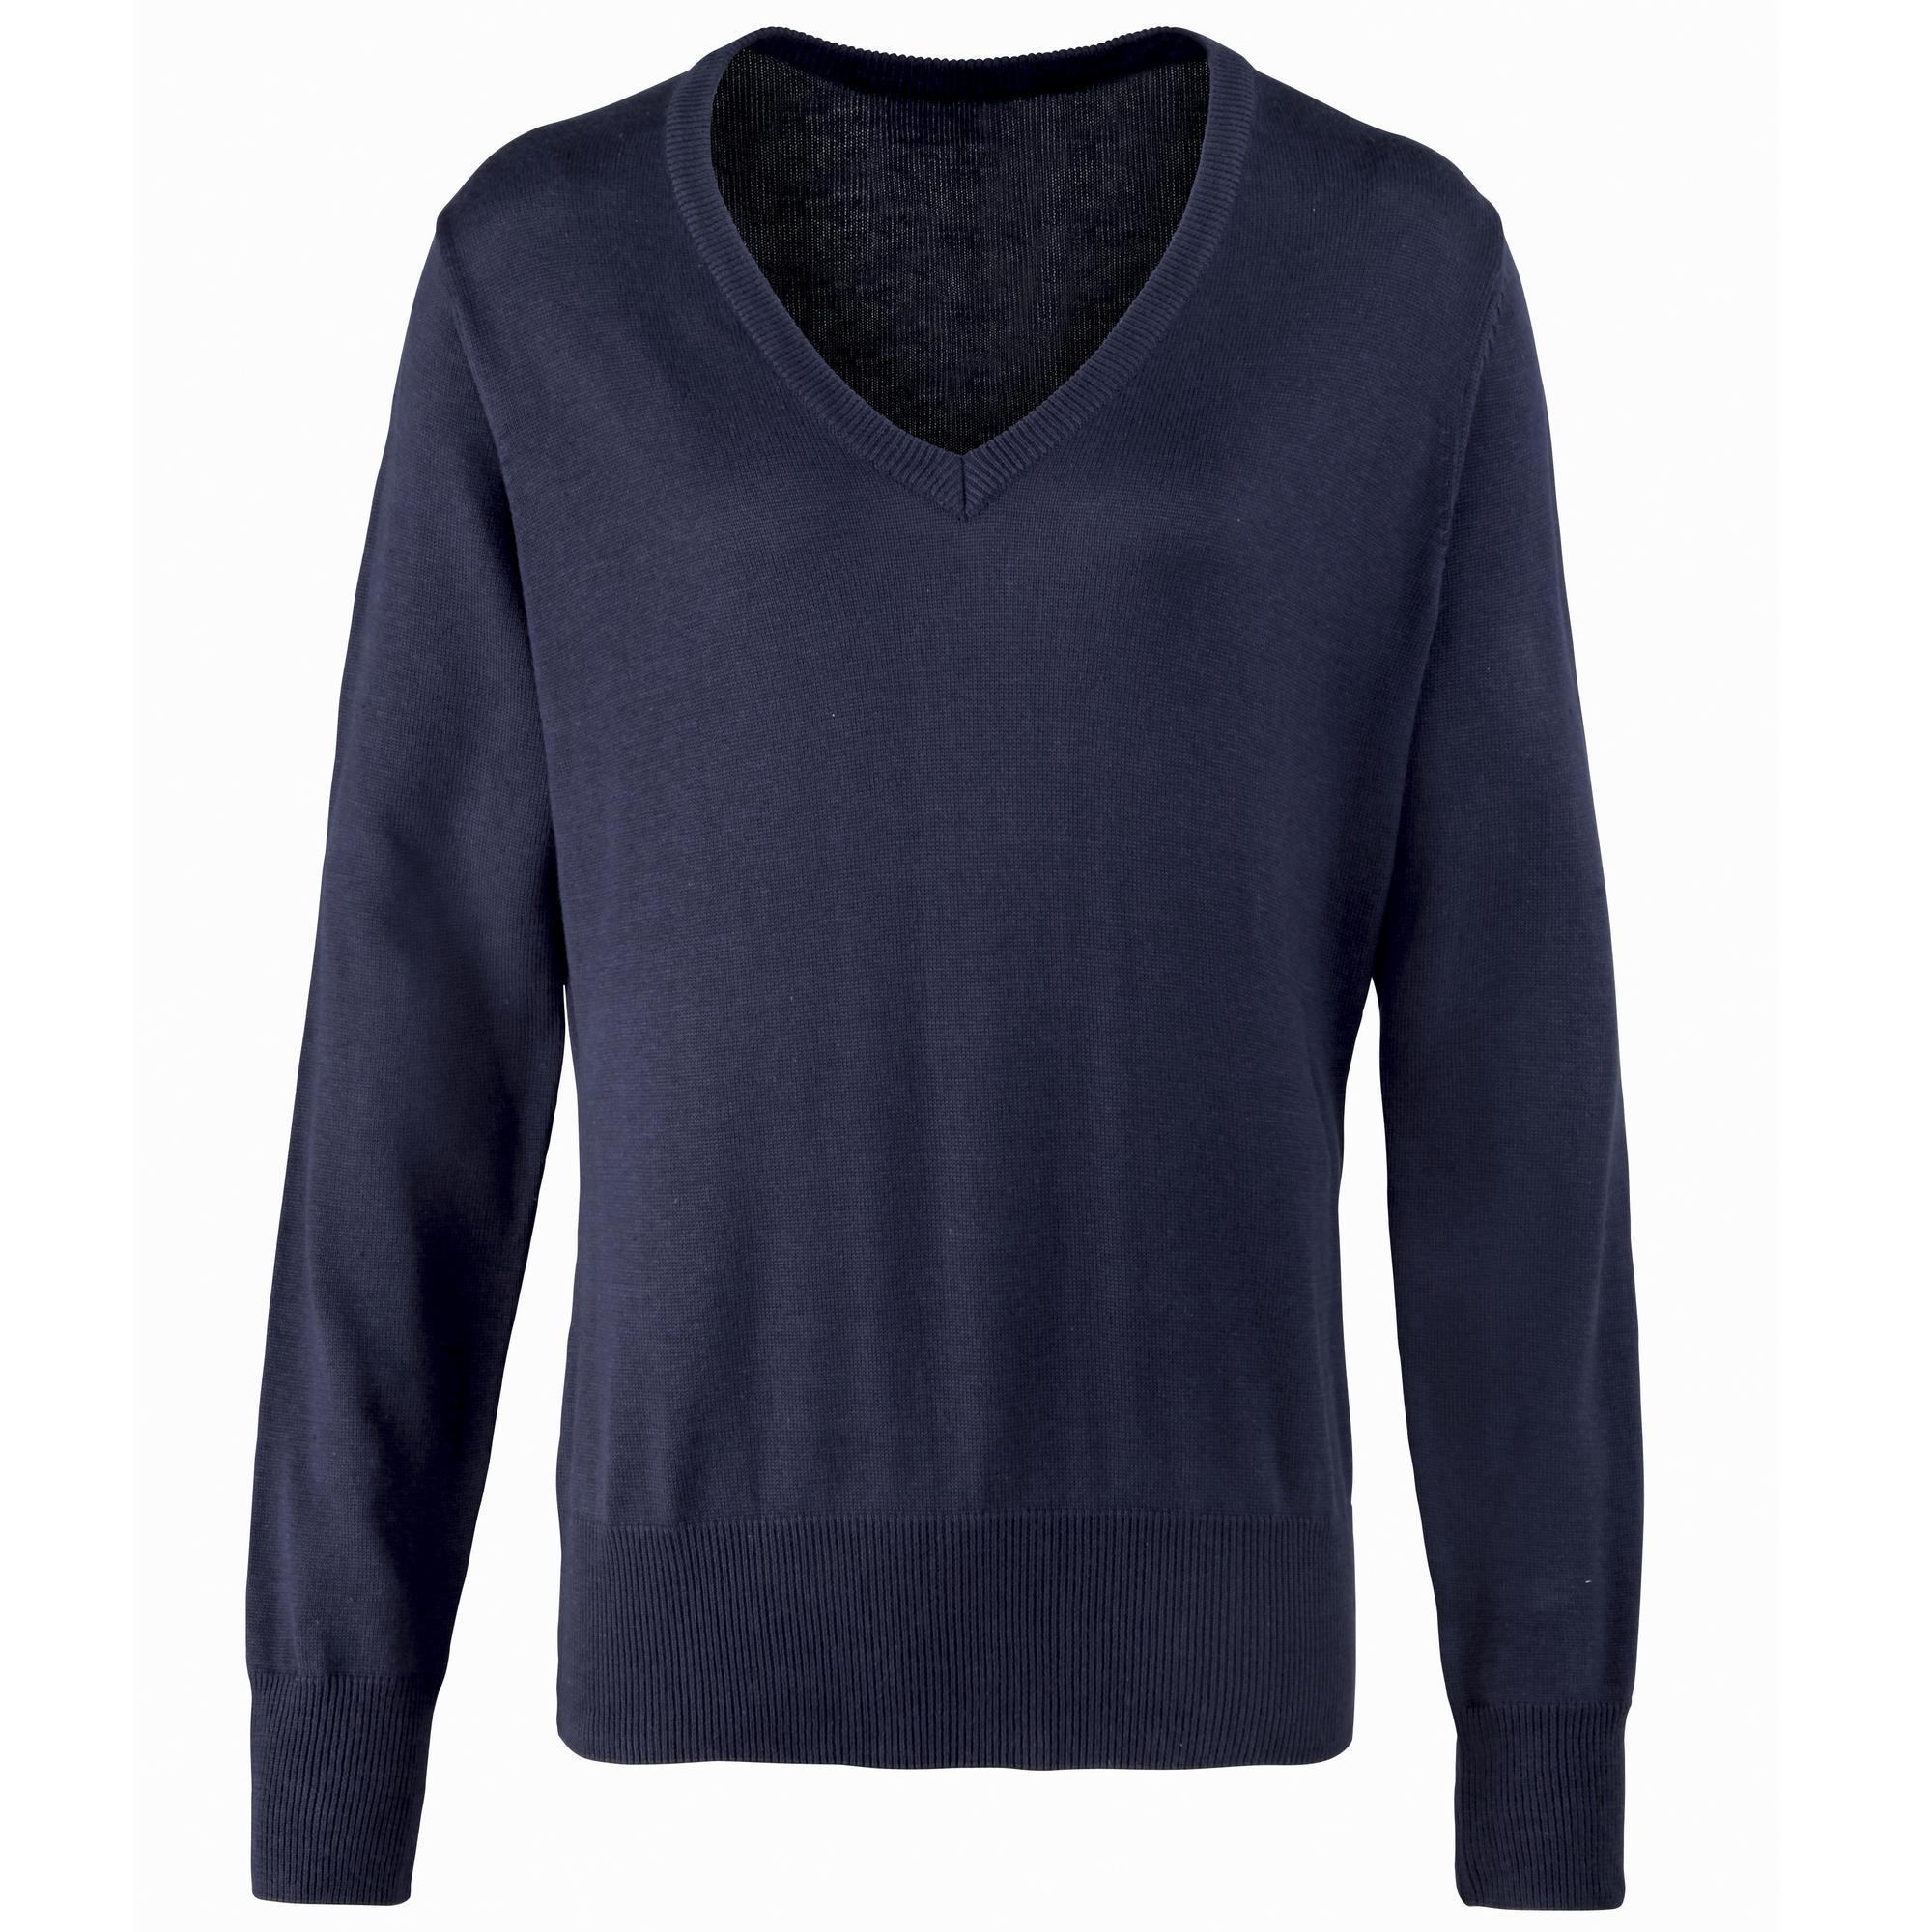 Premier Womens/Ladies V-Neck Knitted Sweater / Top (Navy) (8)